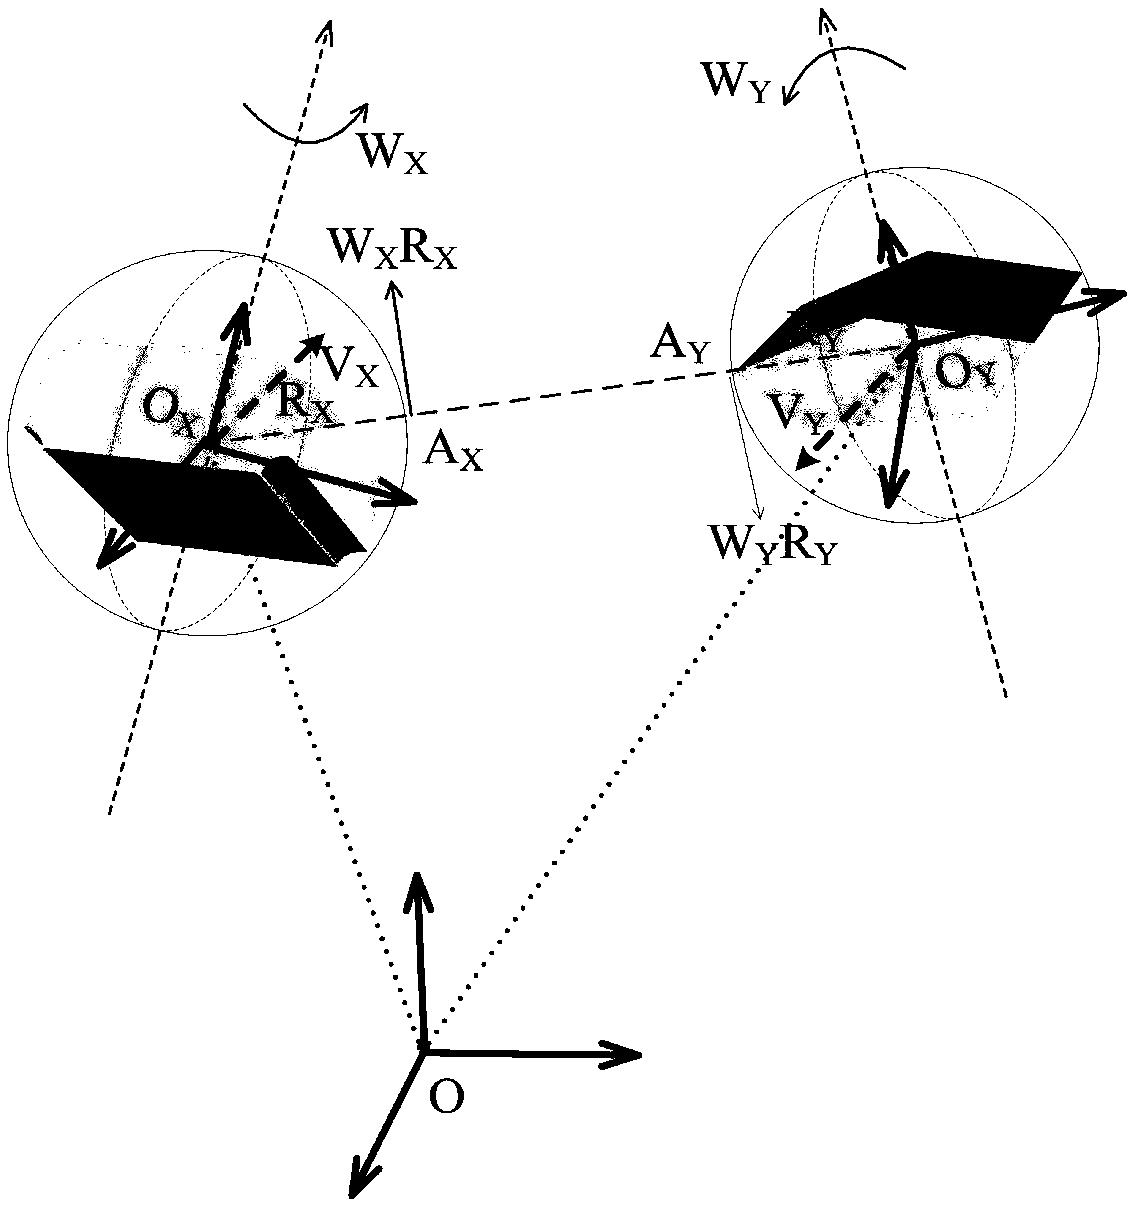 Method of resolving shortest distance between any two polyhedrons in three-dimensional space